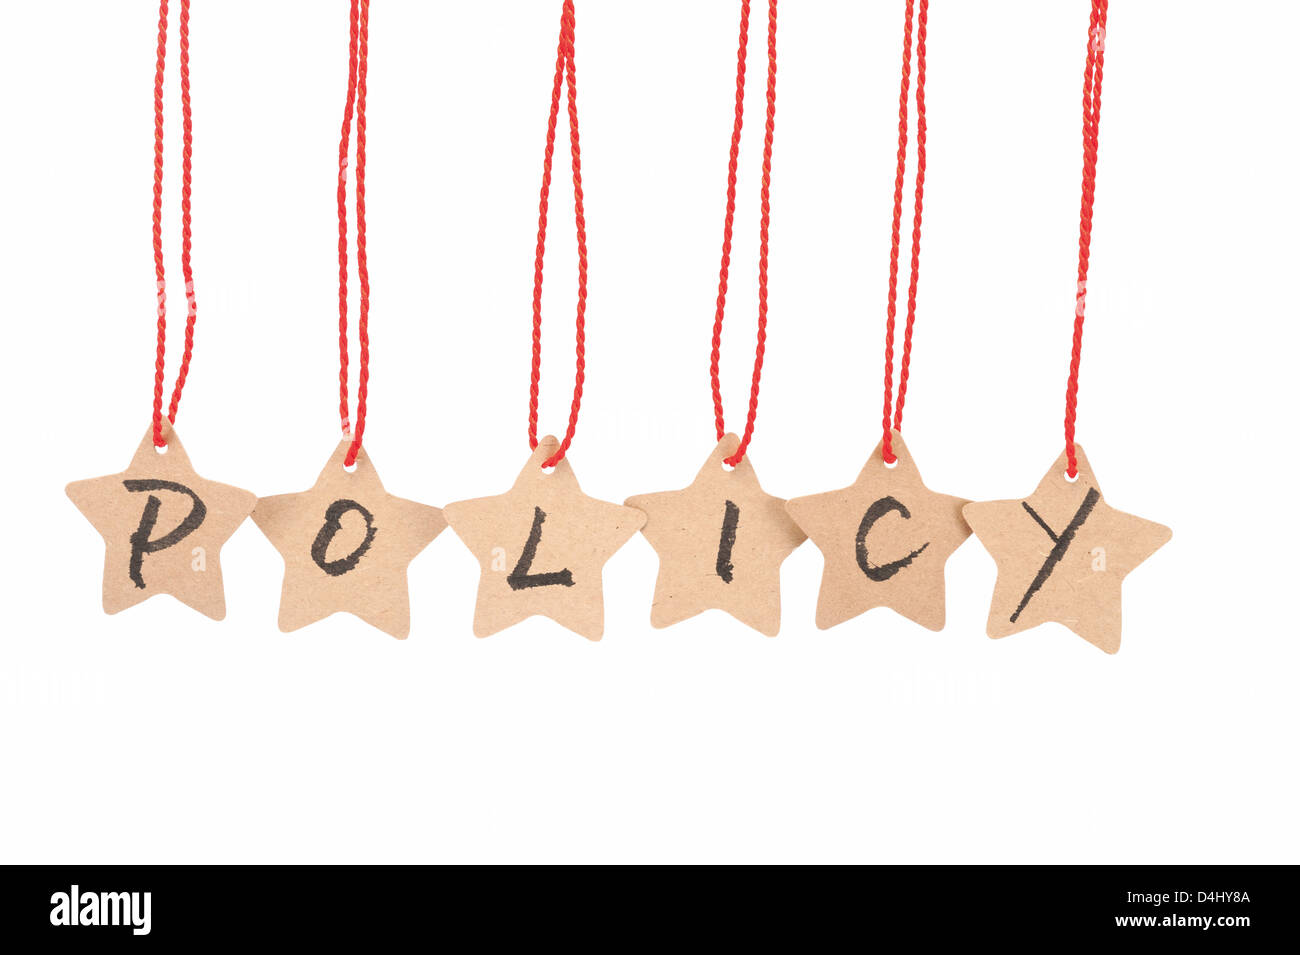 Policy word spelled with paper stars are hung by ropes, isolated against white background Stock Photo